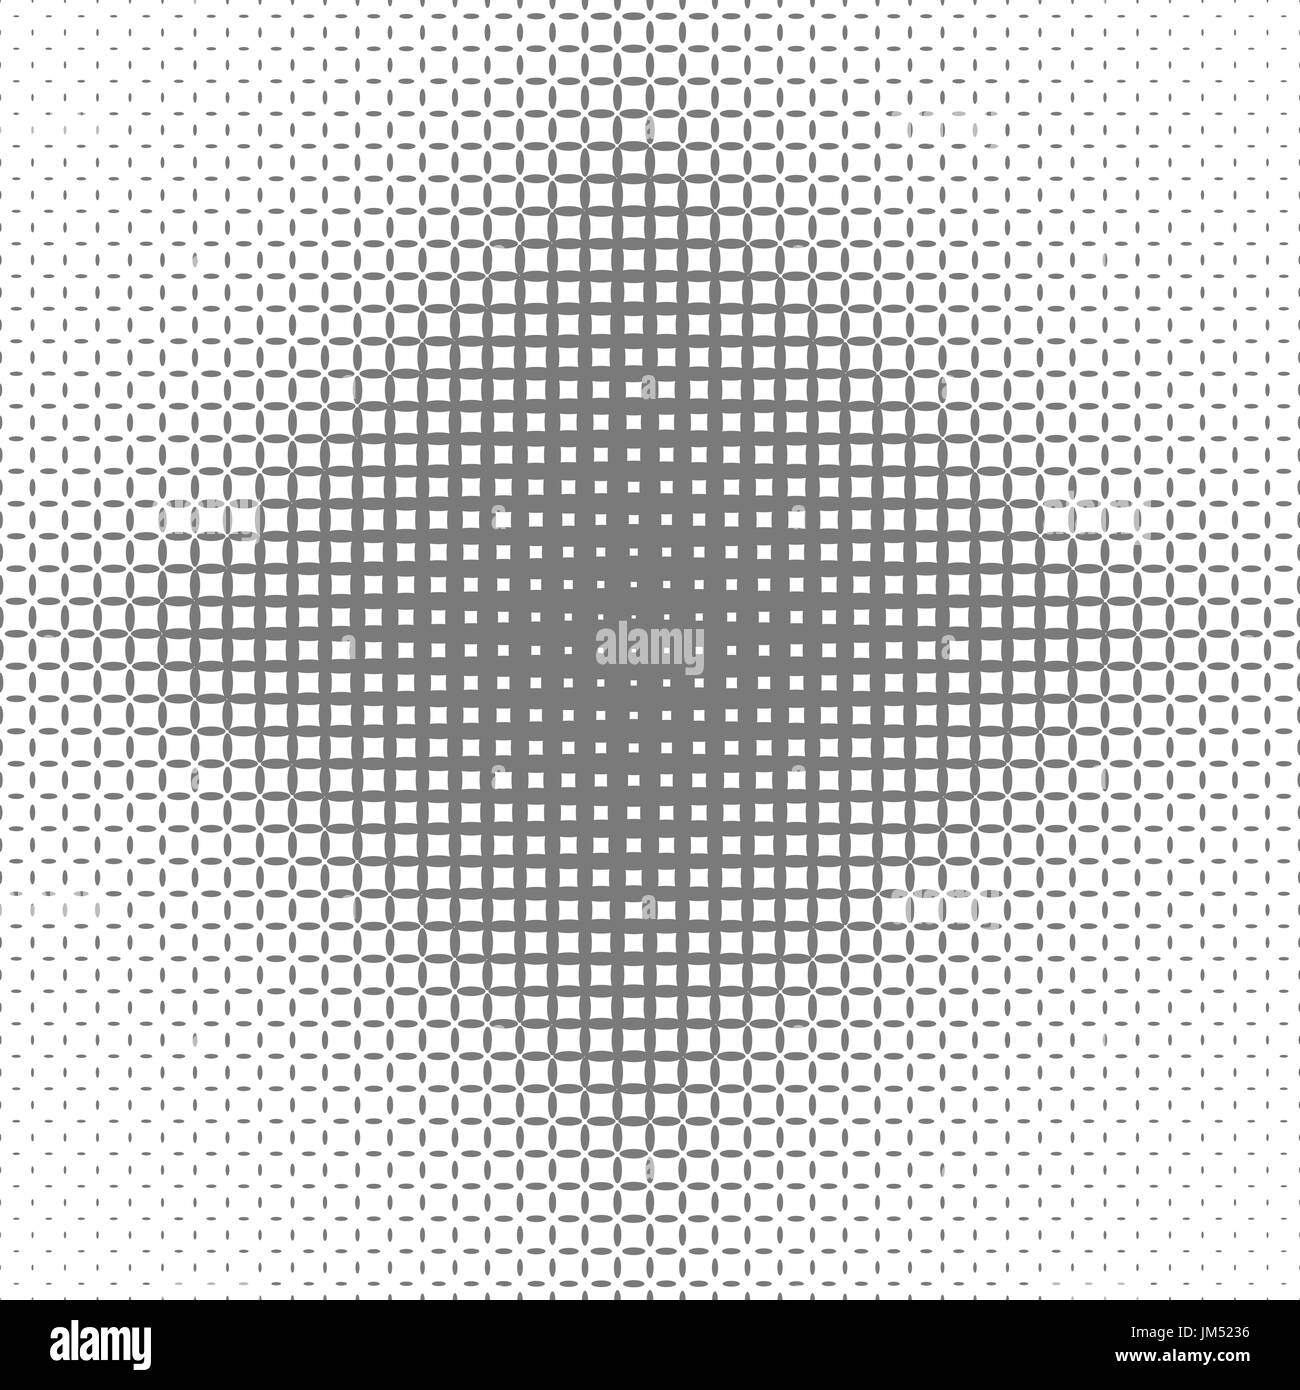 Abstract symmetric halftone ellipse grid pattern background - vector graphic design Stock Vector